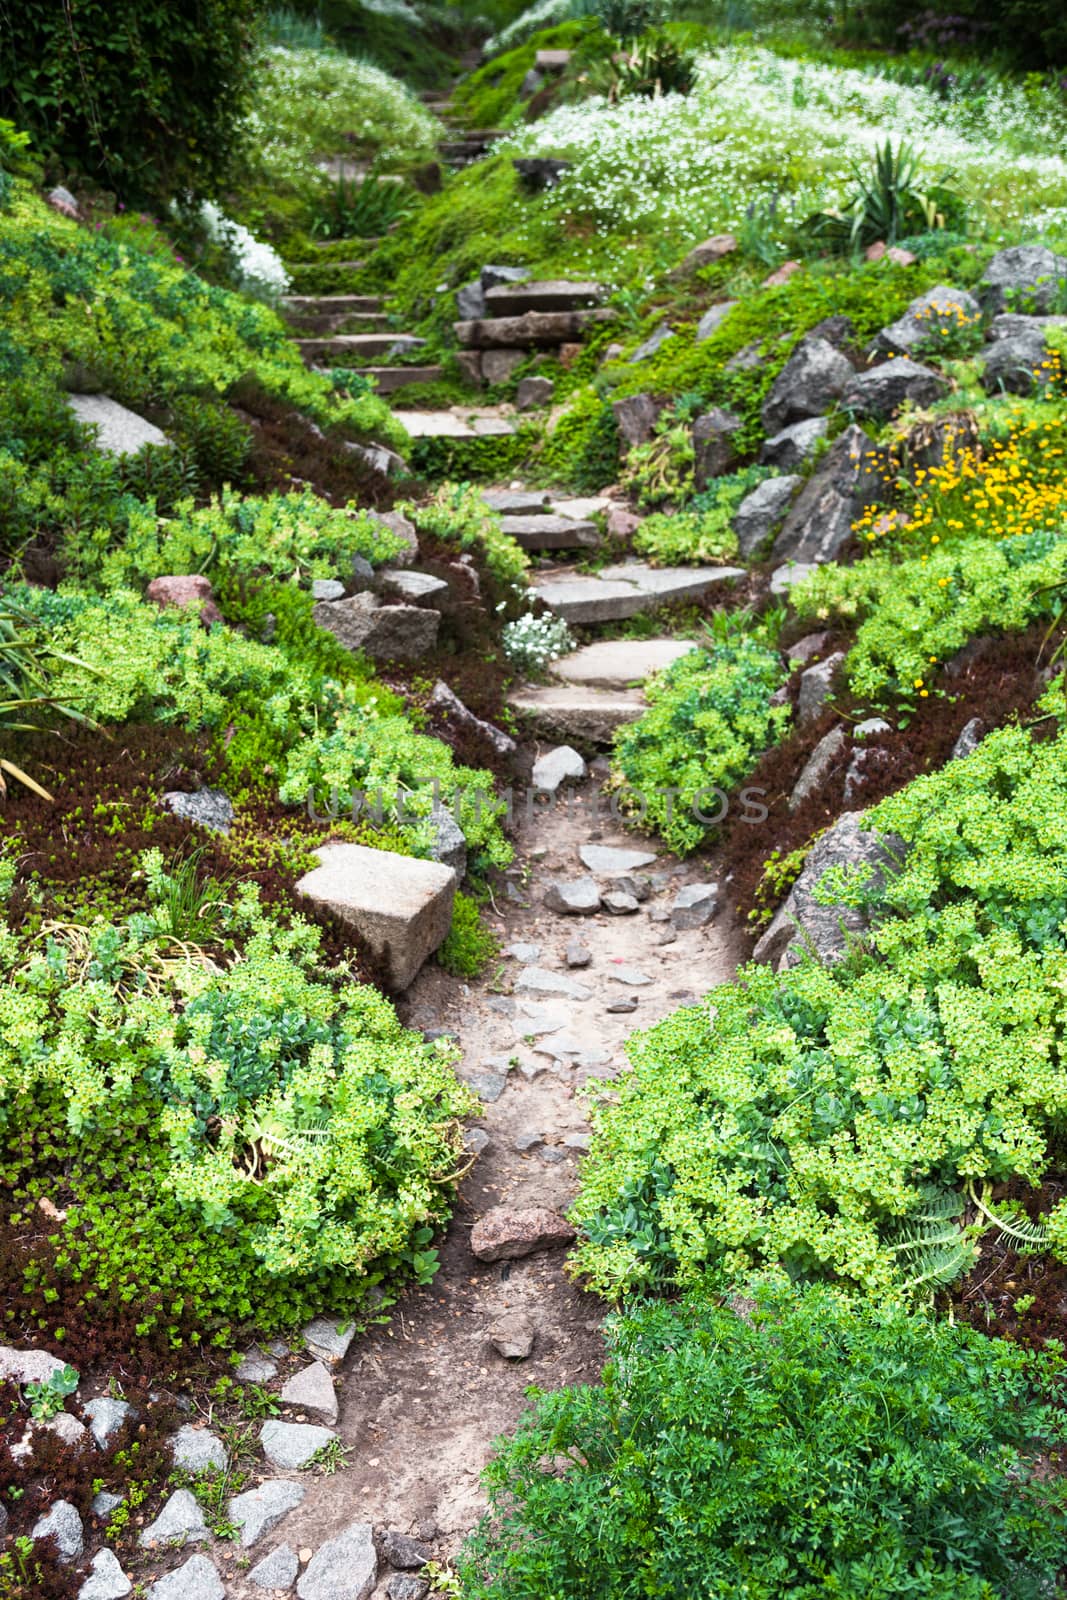 Stony path and stairs in the green blooming garden.